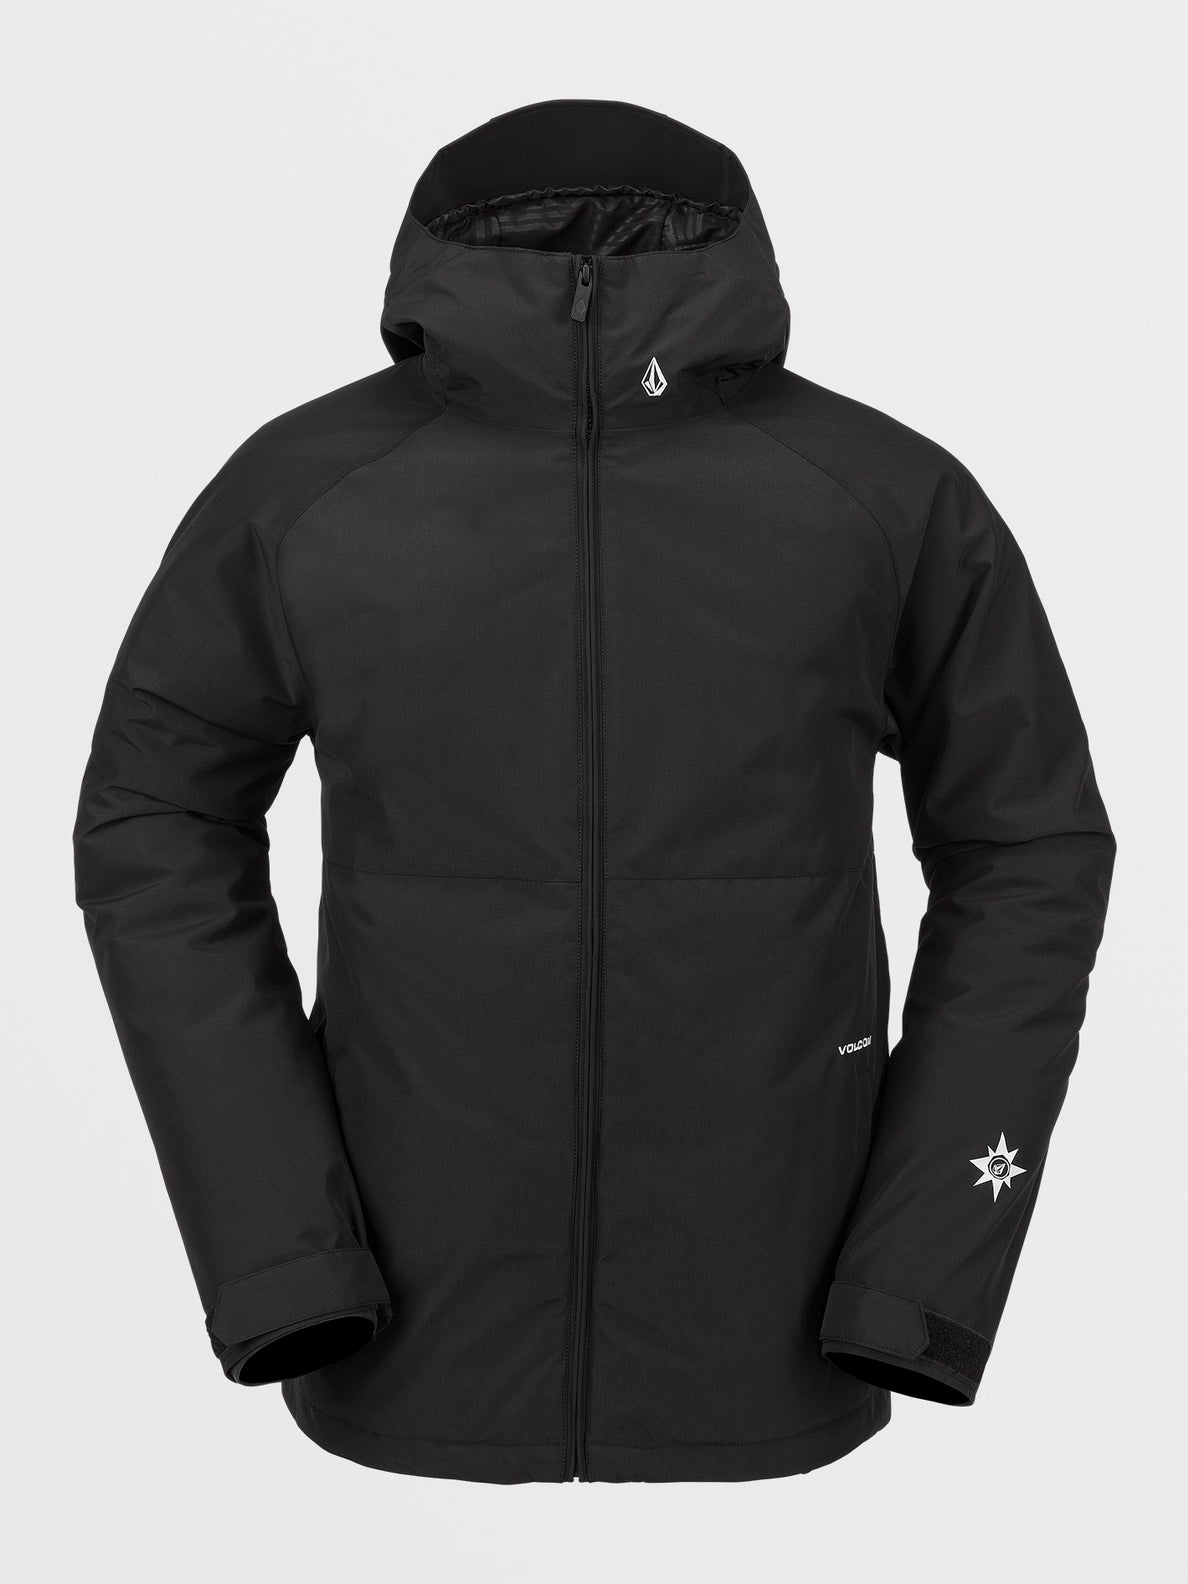 Mens 2836 Insulated Jacket - Black (G0452408_BLK) [F]